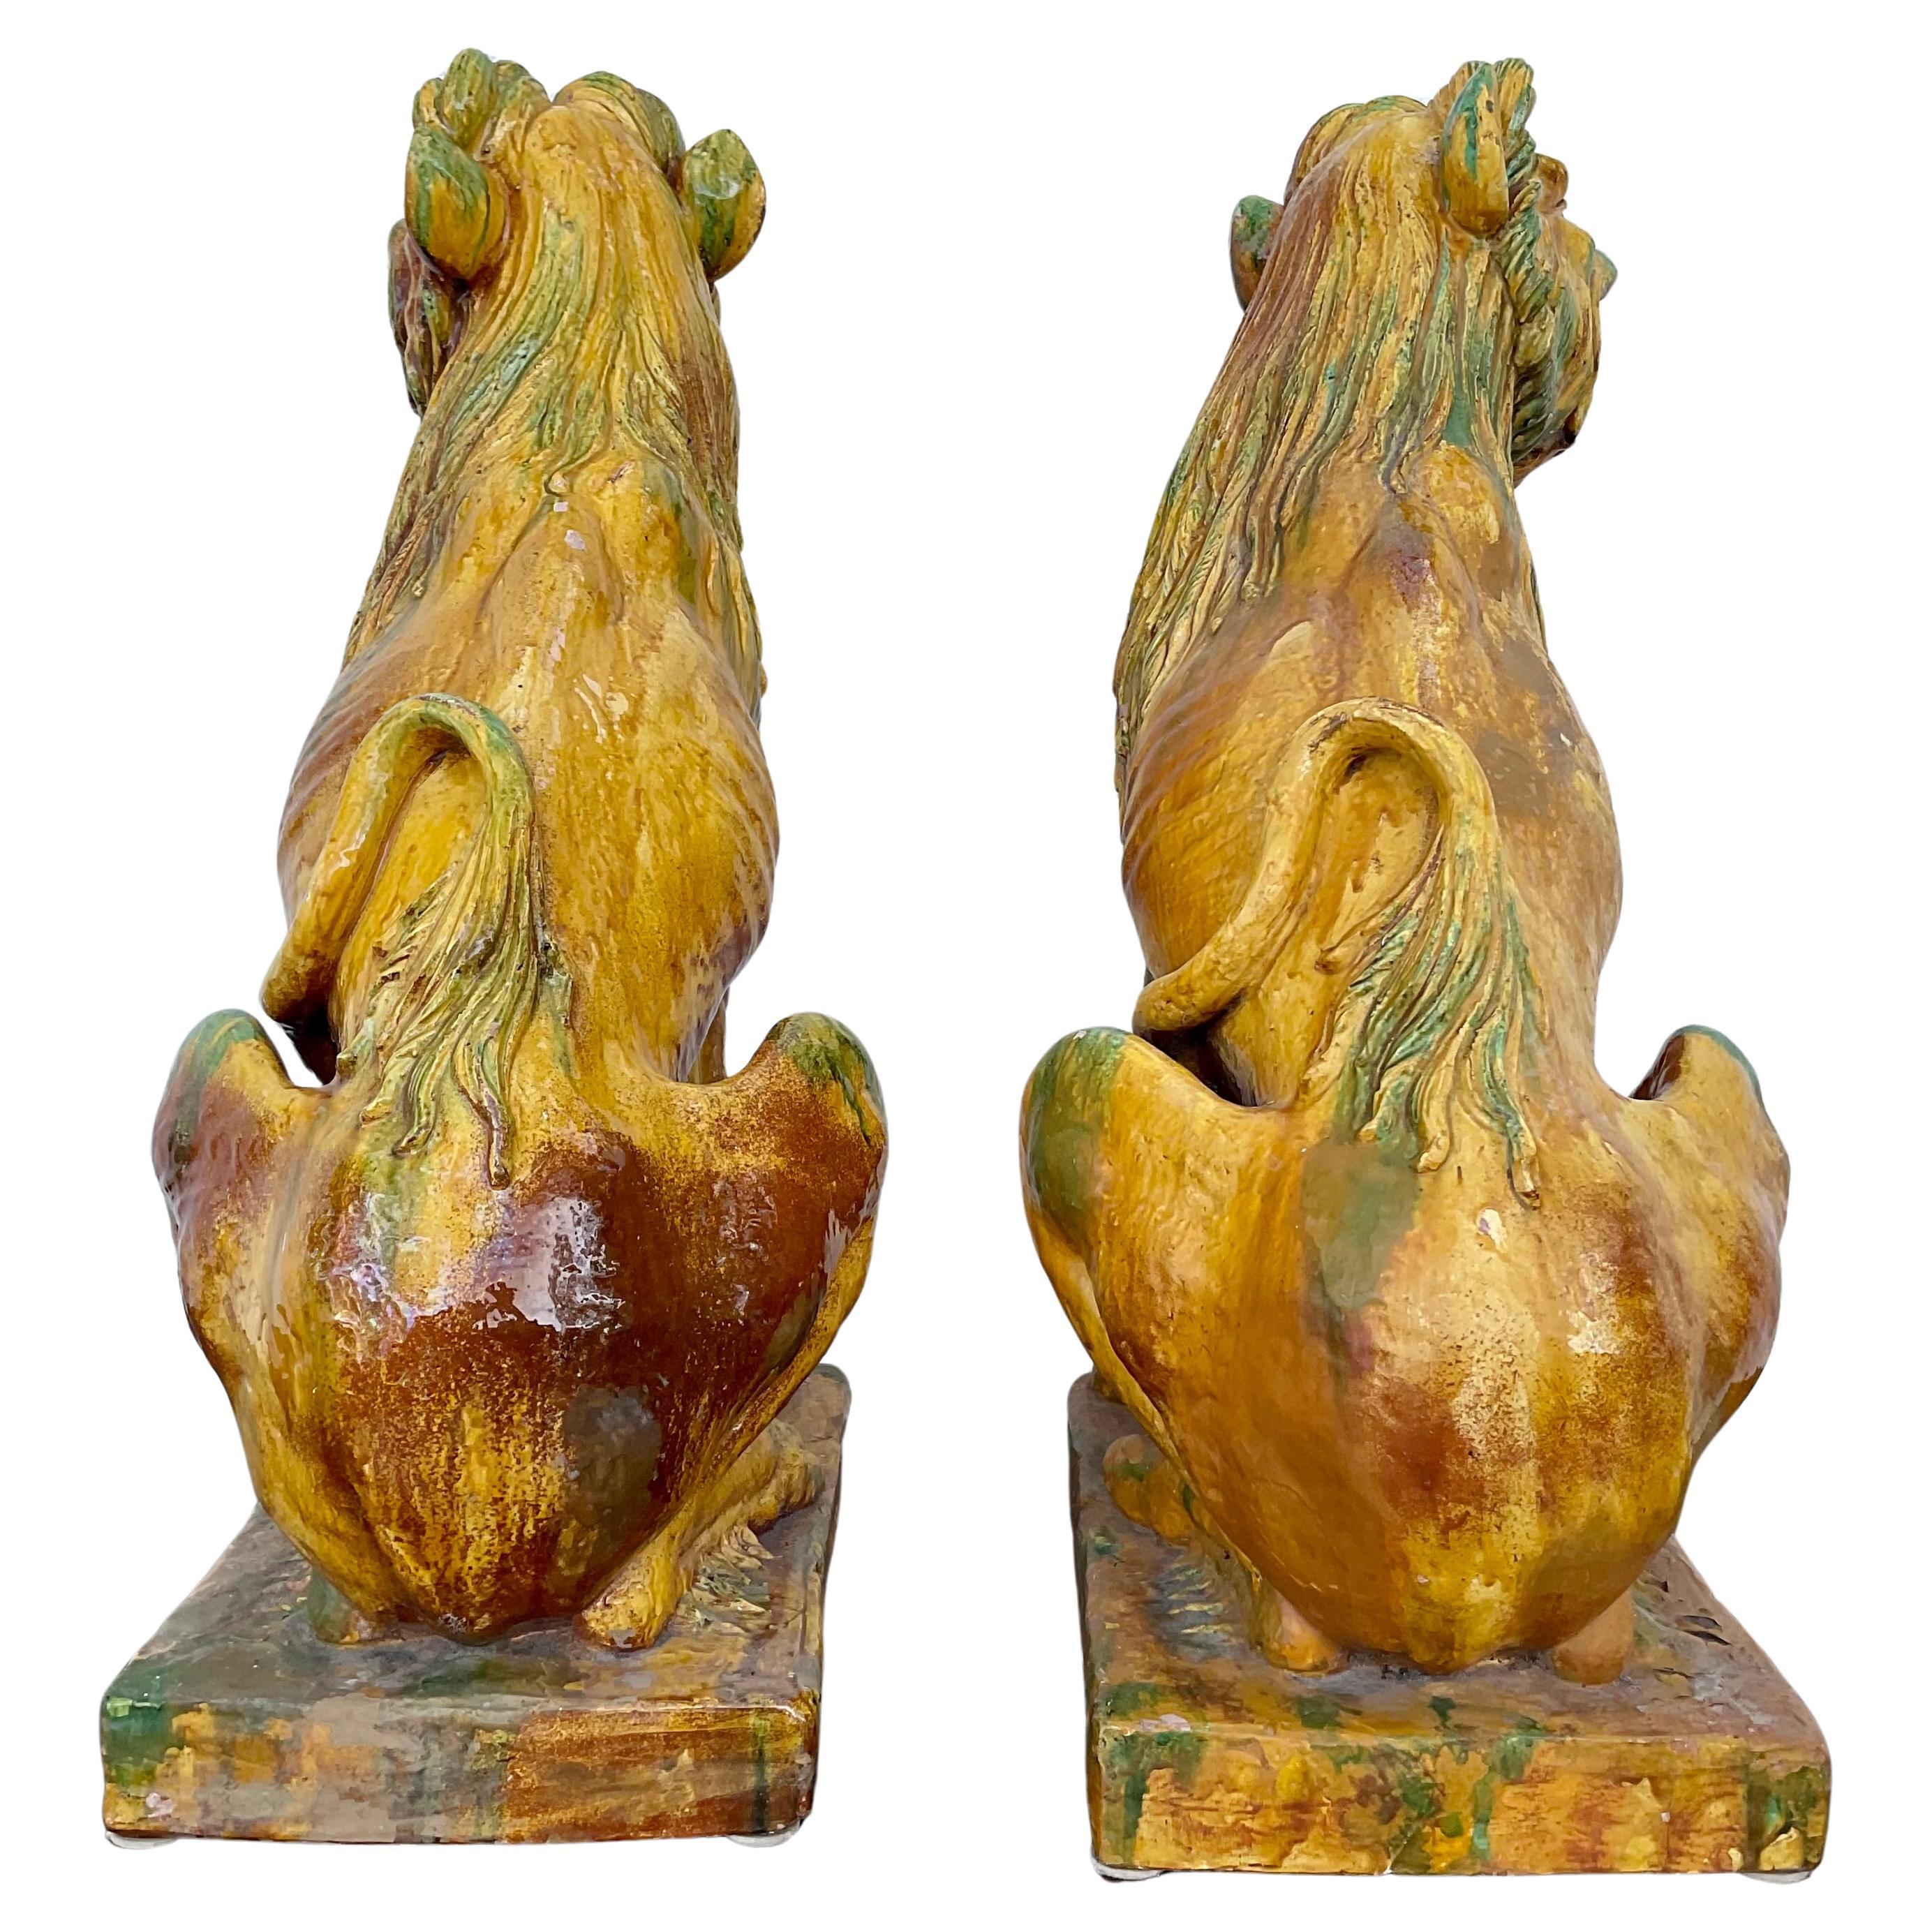 20th Century Pair of Large Glazed Terra Cotta Lions or Foo Dogs For Sale